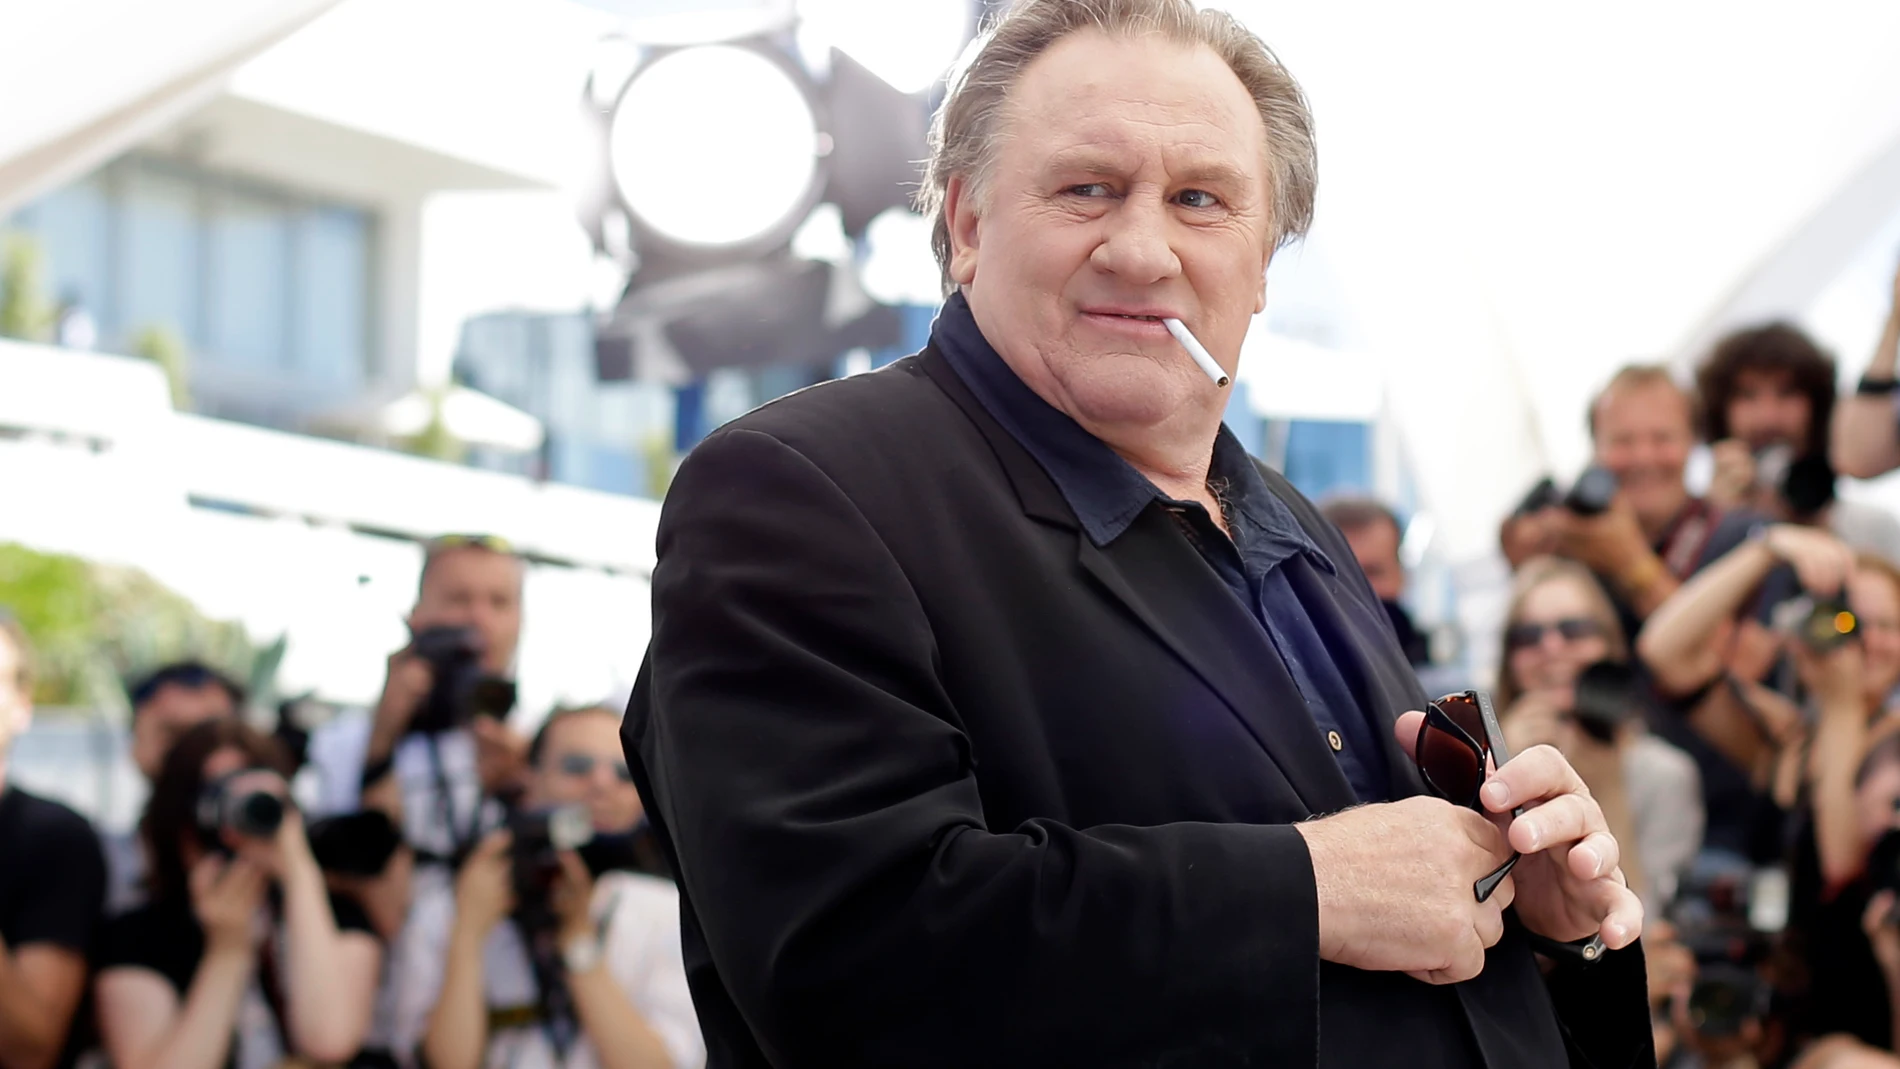 FILE - Actor Gerard Depardieu poses for photographers during a photo call for the film Valley of Love, at the 68th international film festival, Cannes, southern France, Friday, May 22, 2015. The Grevin Museum of waxworks in Paris has removed the wax figure of French actor Gerard Depardieu due to negative reactions from visitors, the museum said Monday. (AP Photo/Thibault Camus, File)